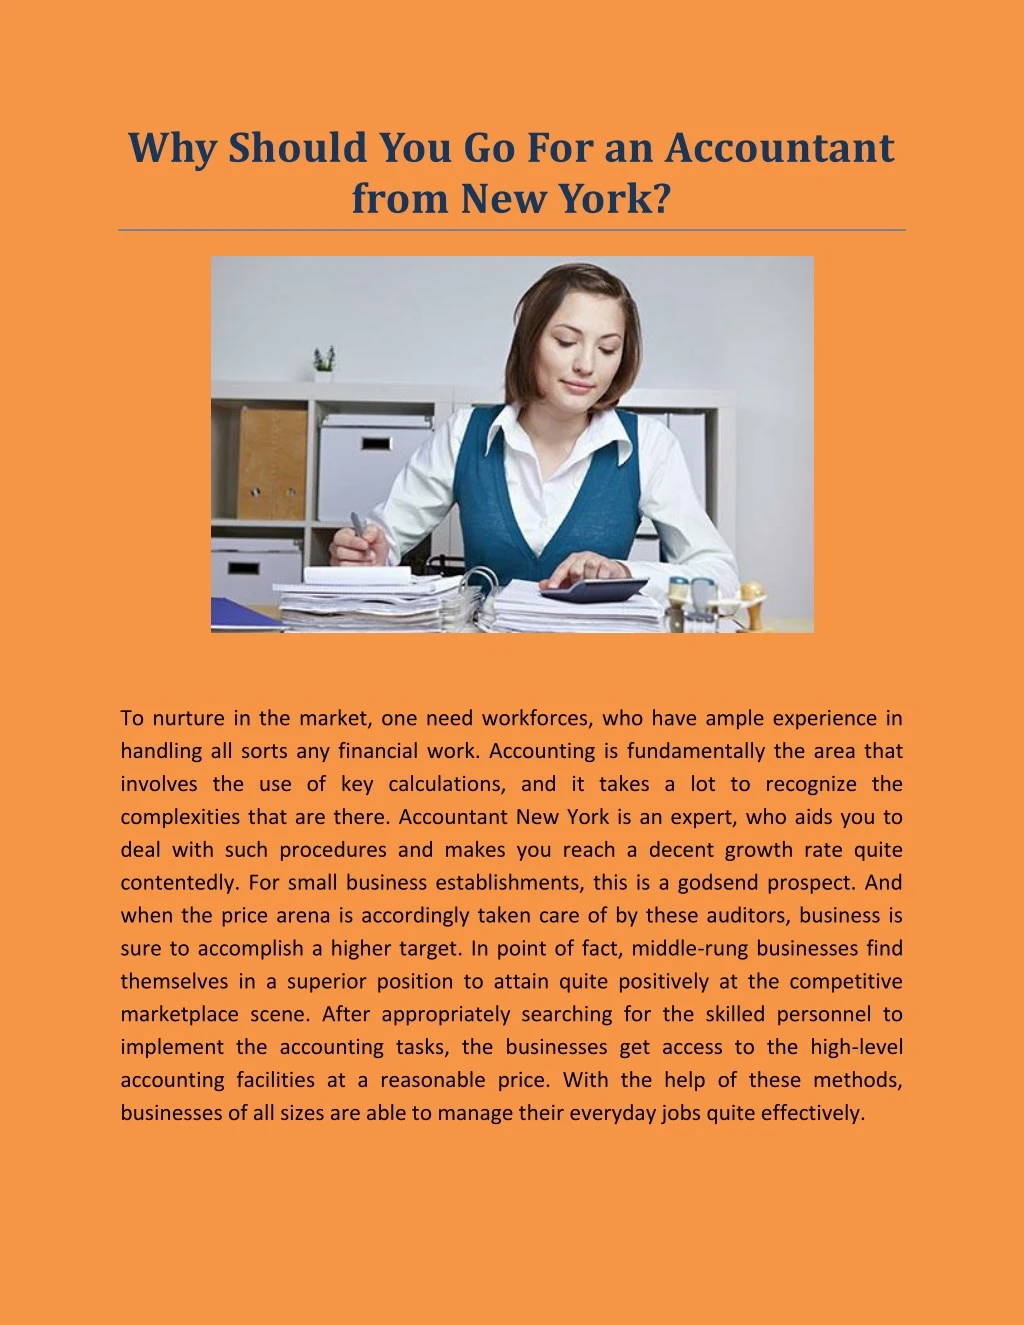 why should you go for an accountant from new york